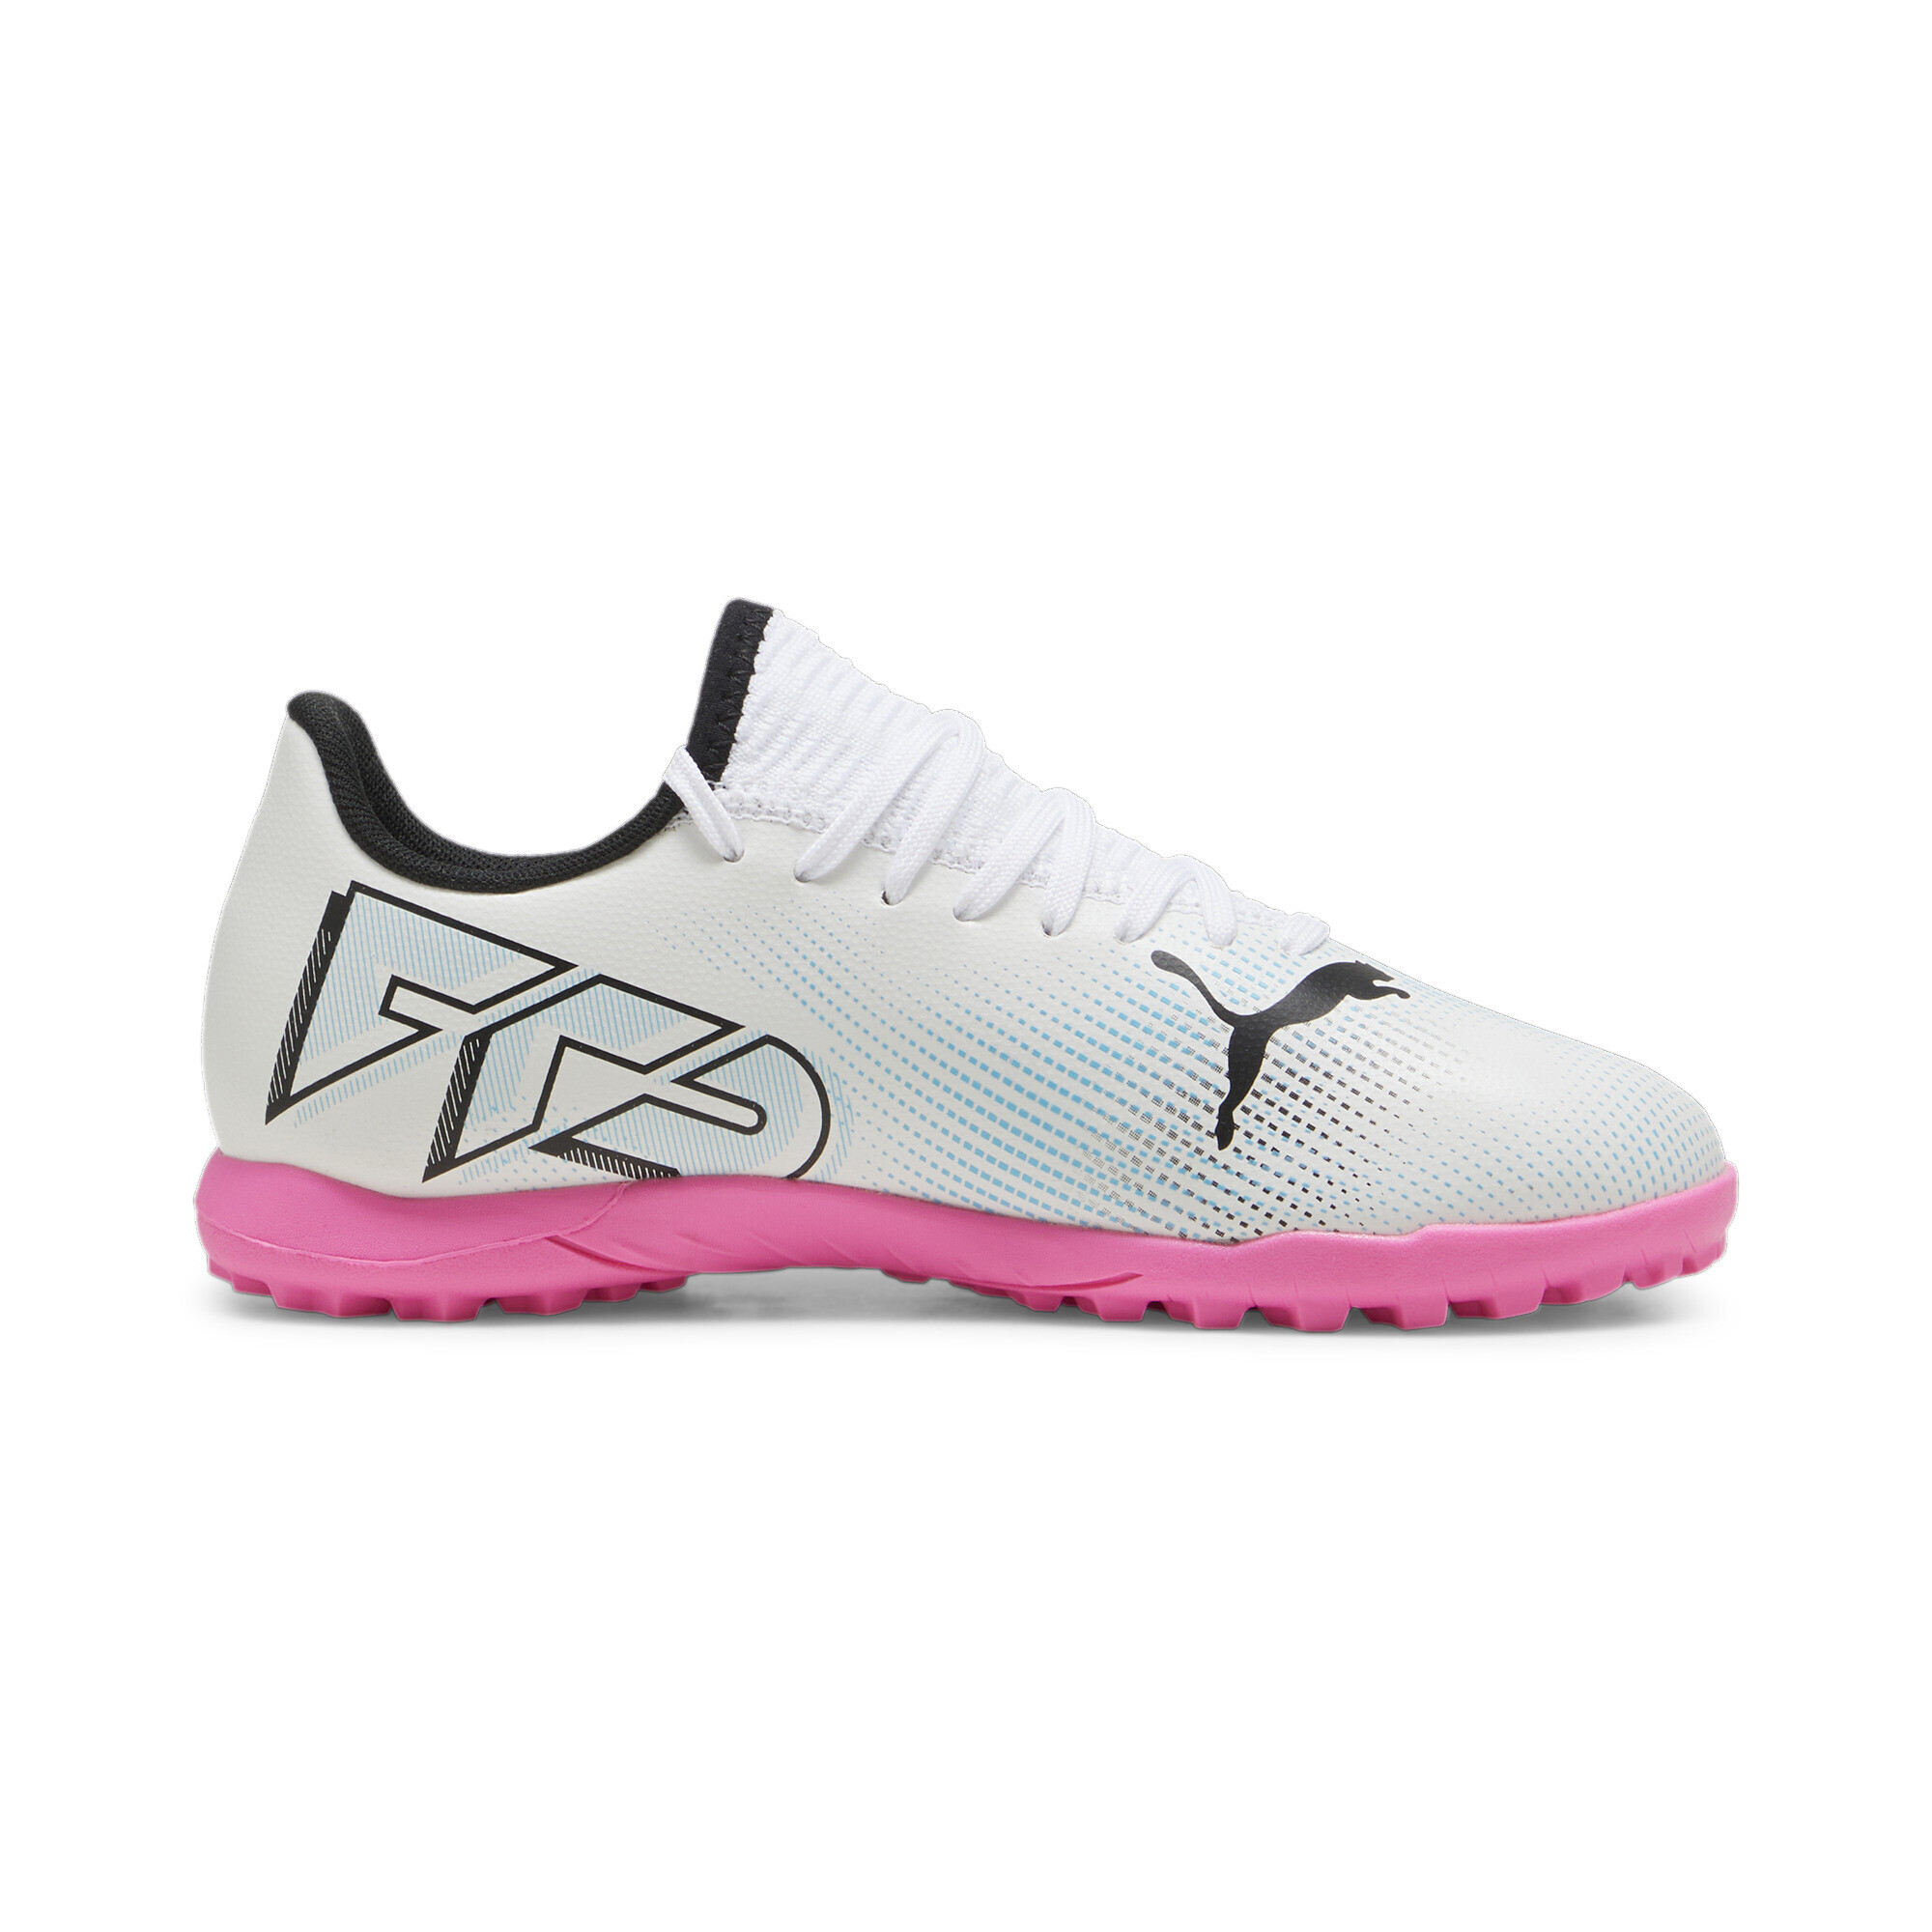 PUMA FUTURE 7 PLAY TT Youth Football Boots In White/Pink, Size EU 29